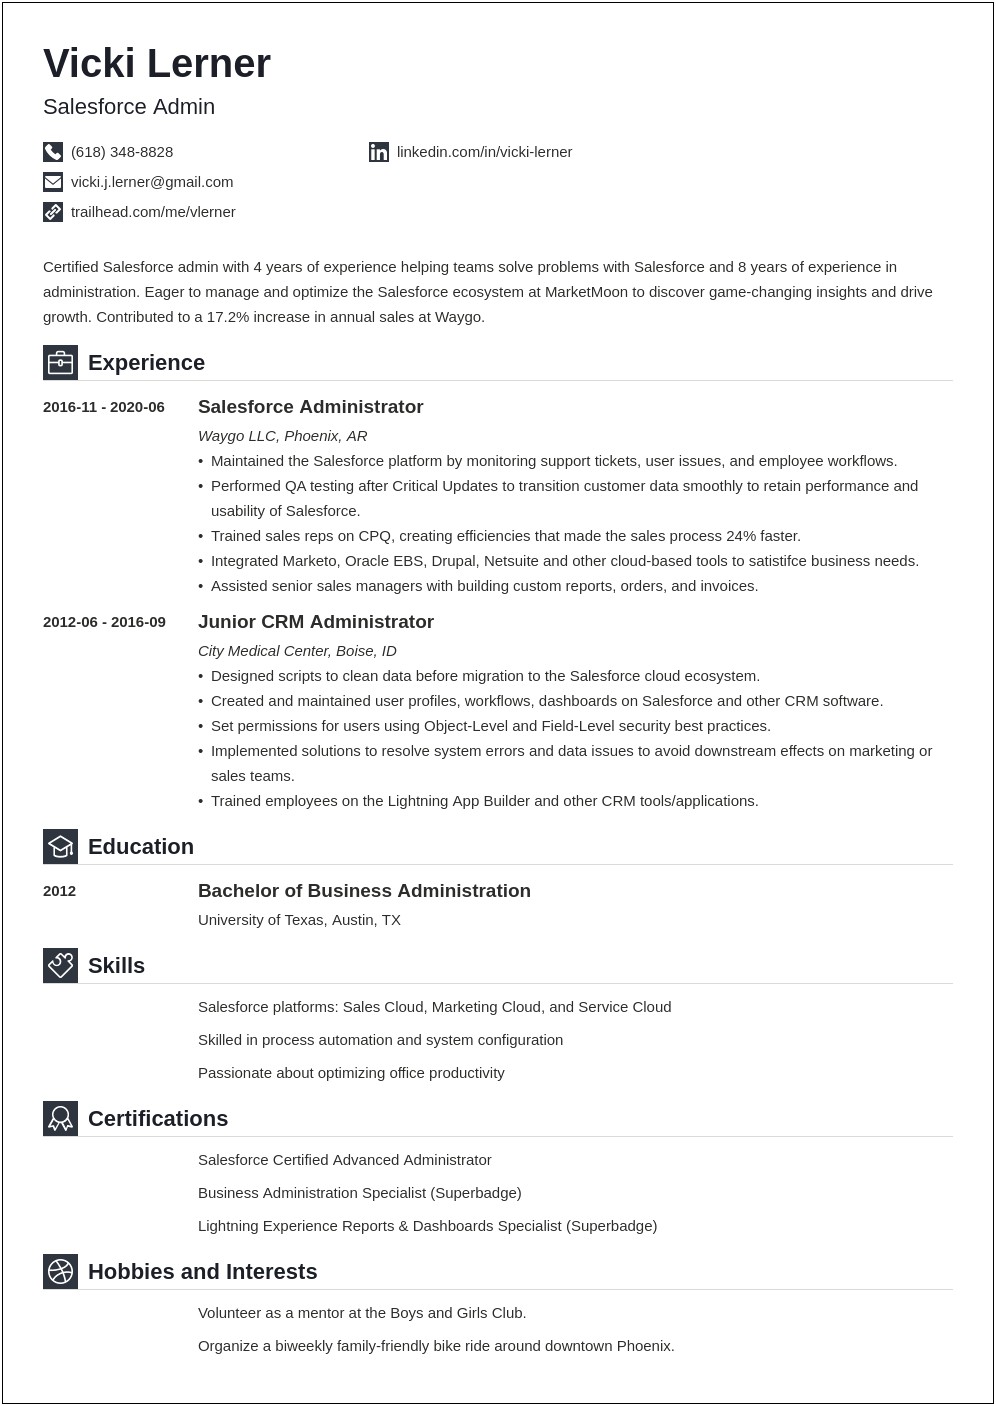 Sample Resume With Migration Of Company Systems